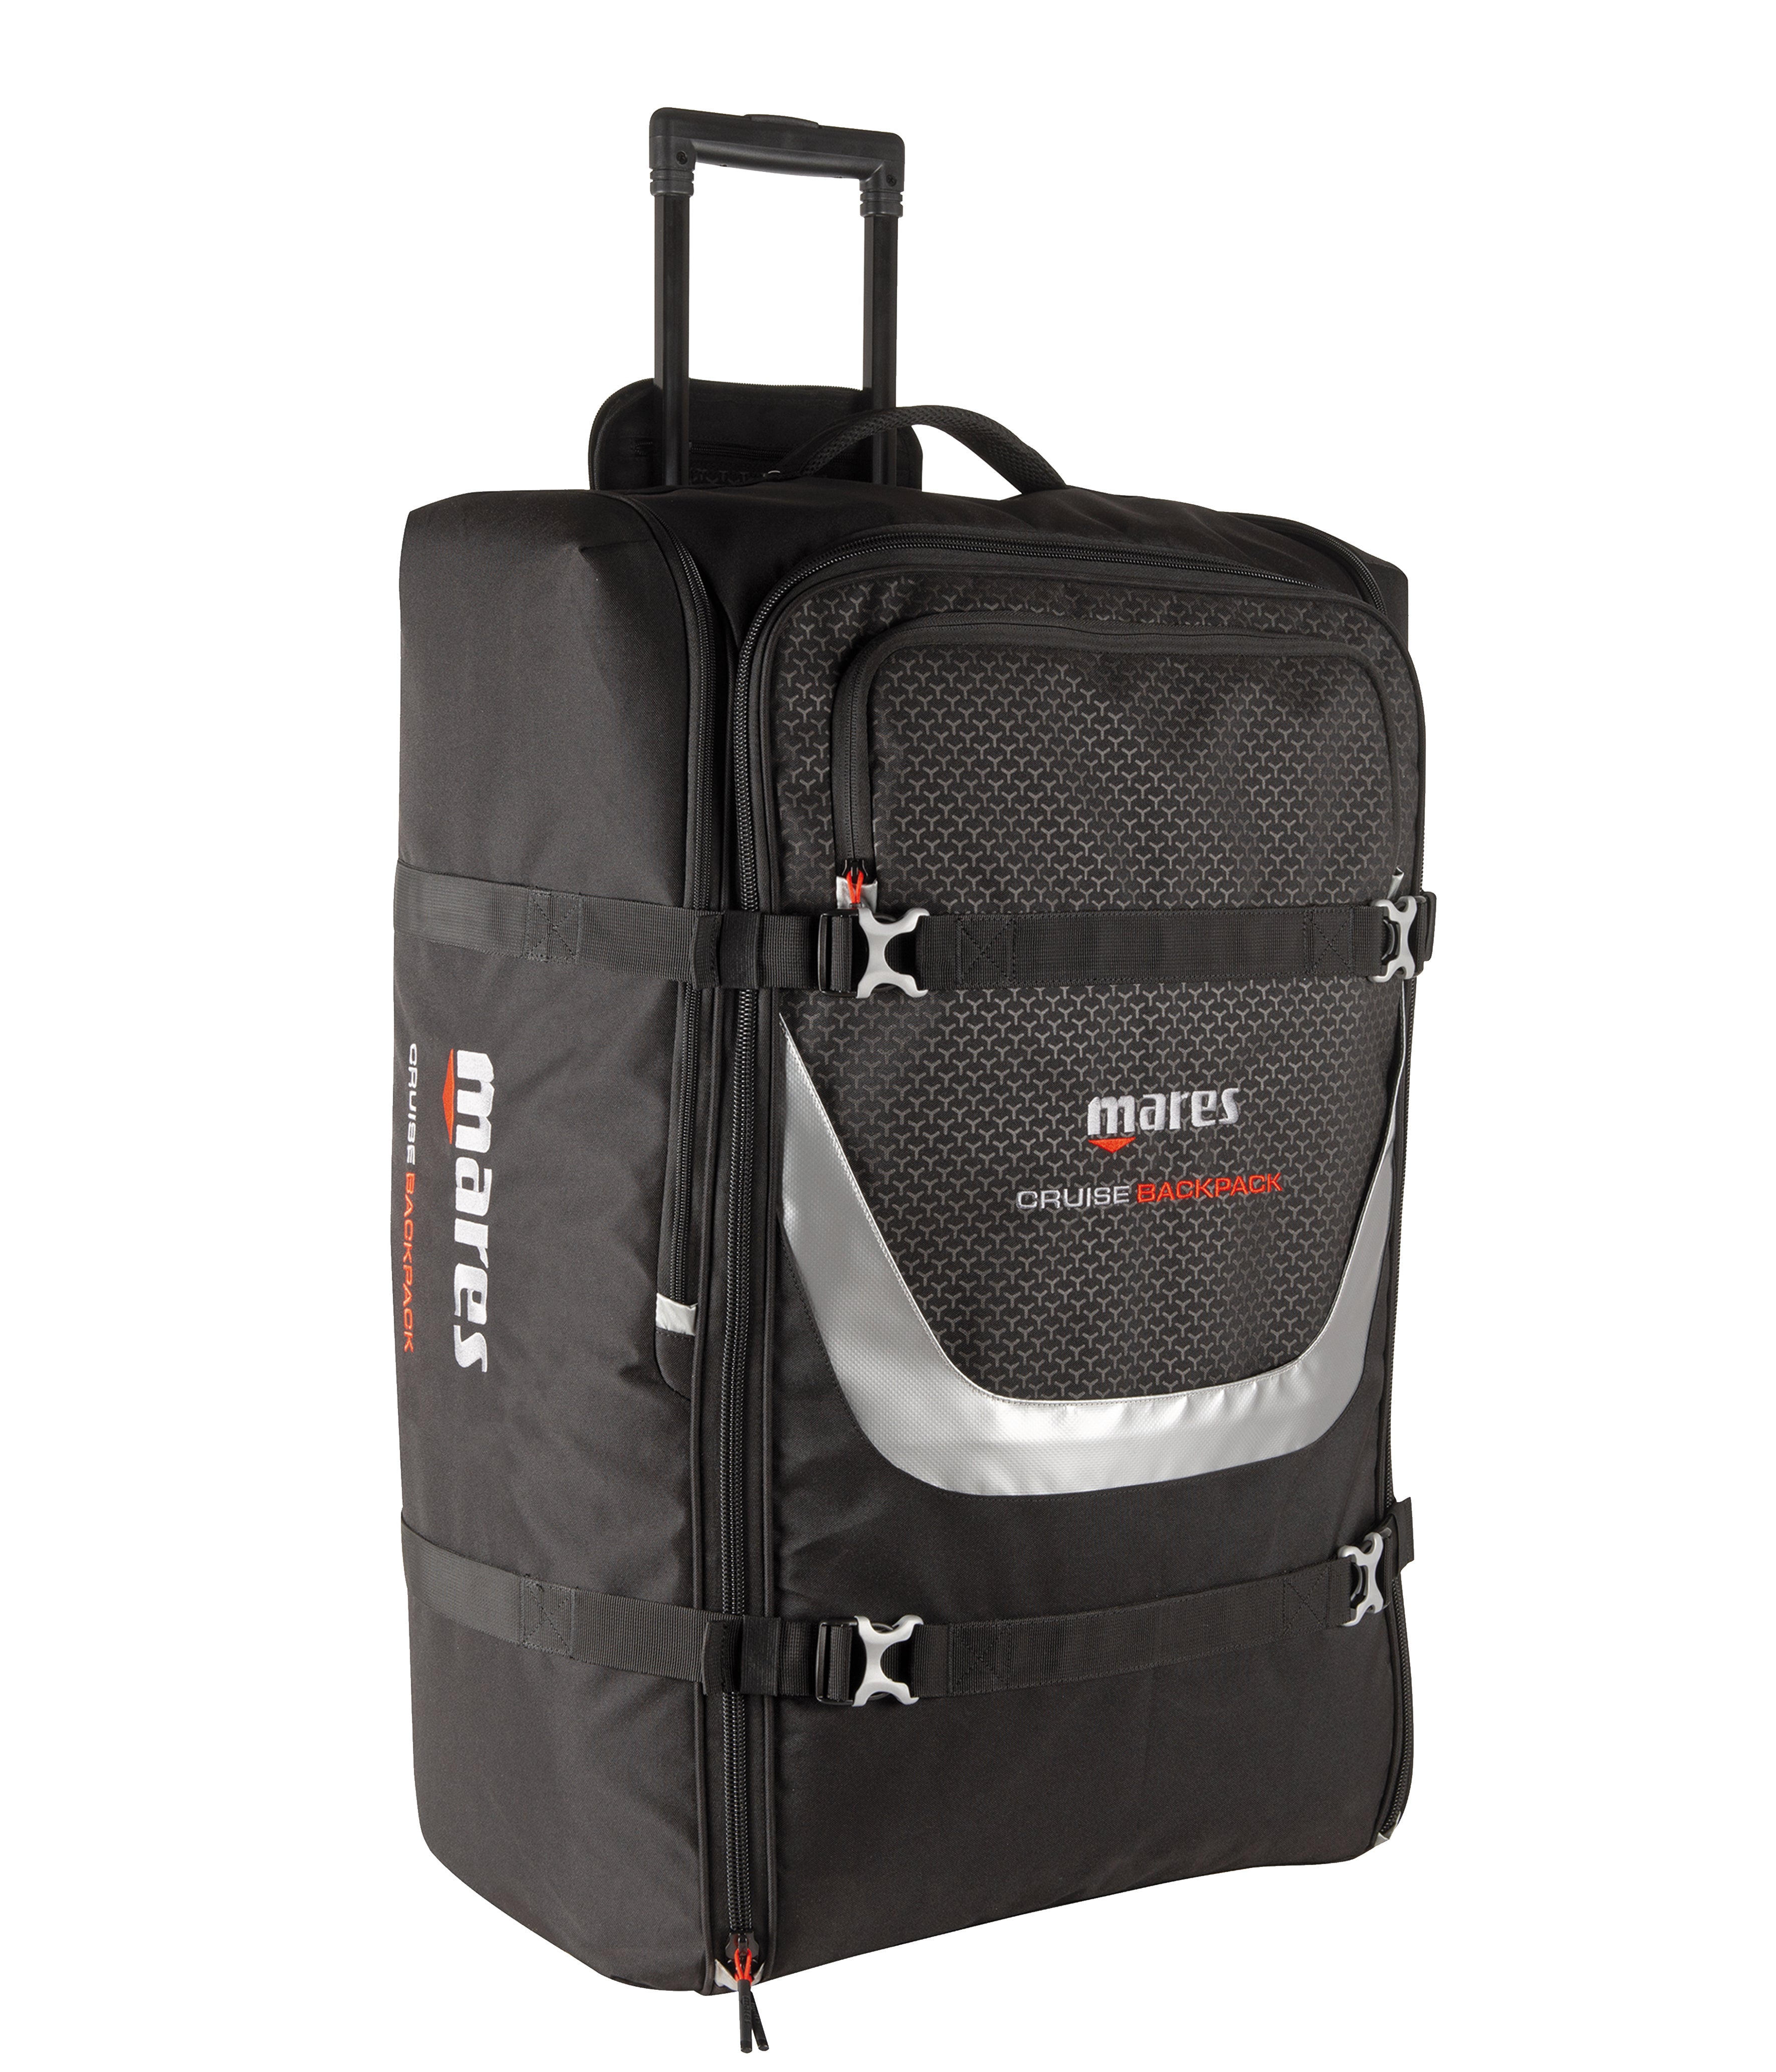 Mares Cruise Backpack Wheeled Dive Holdall 100L, 2019